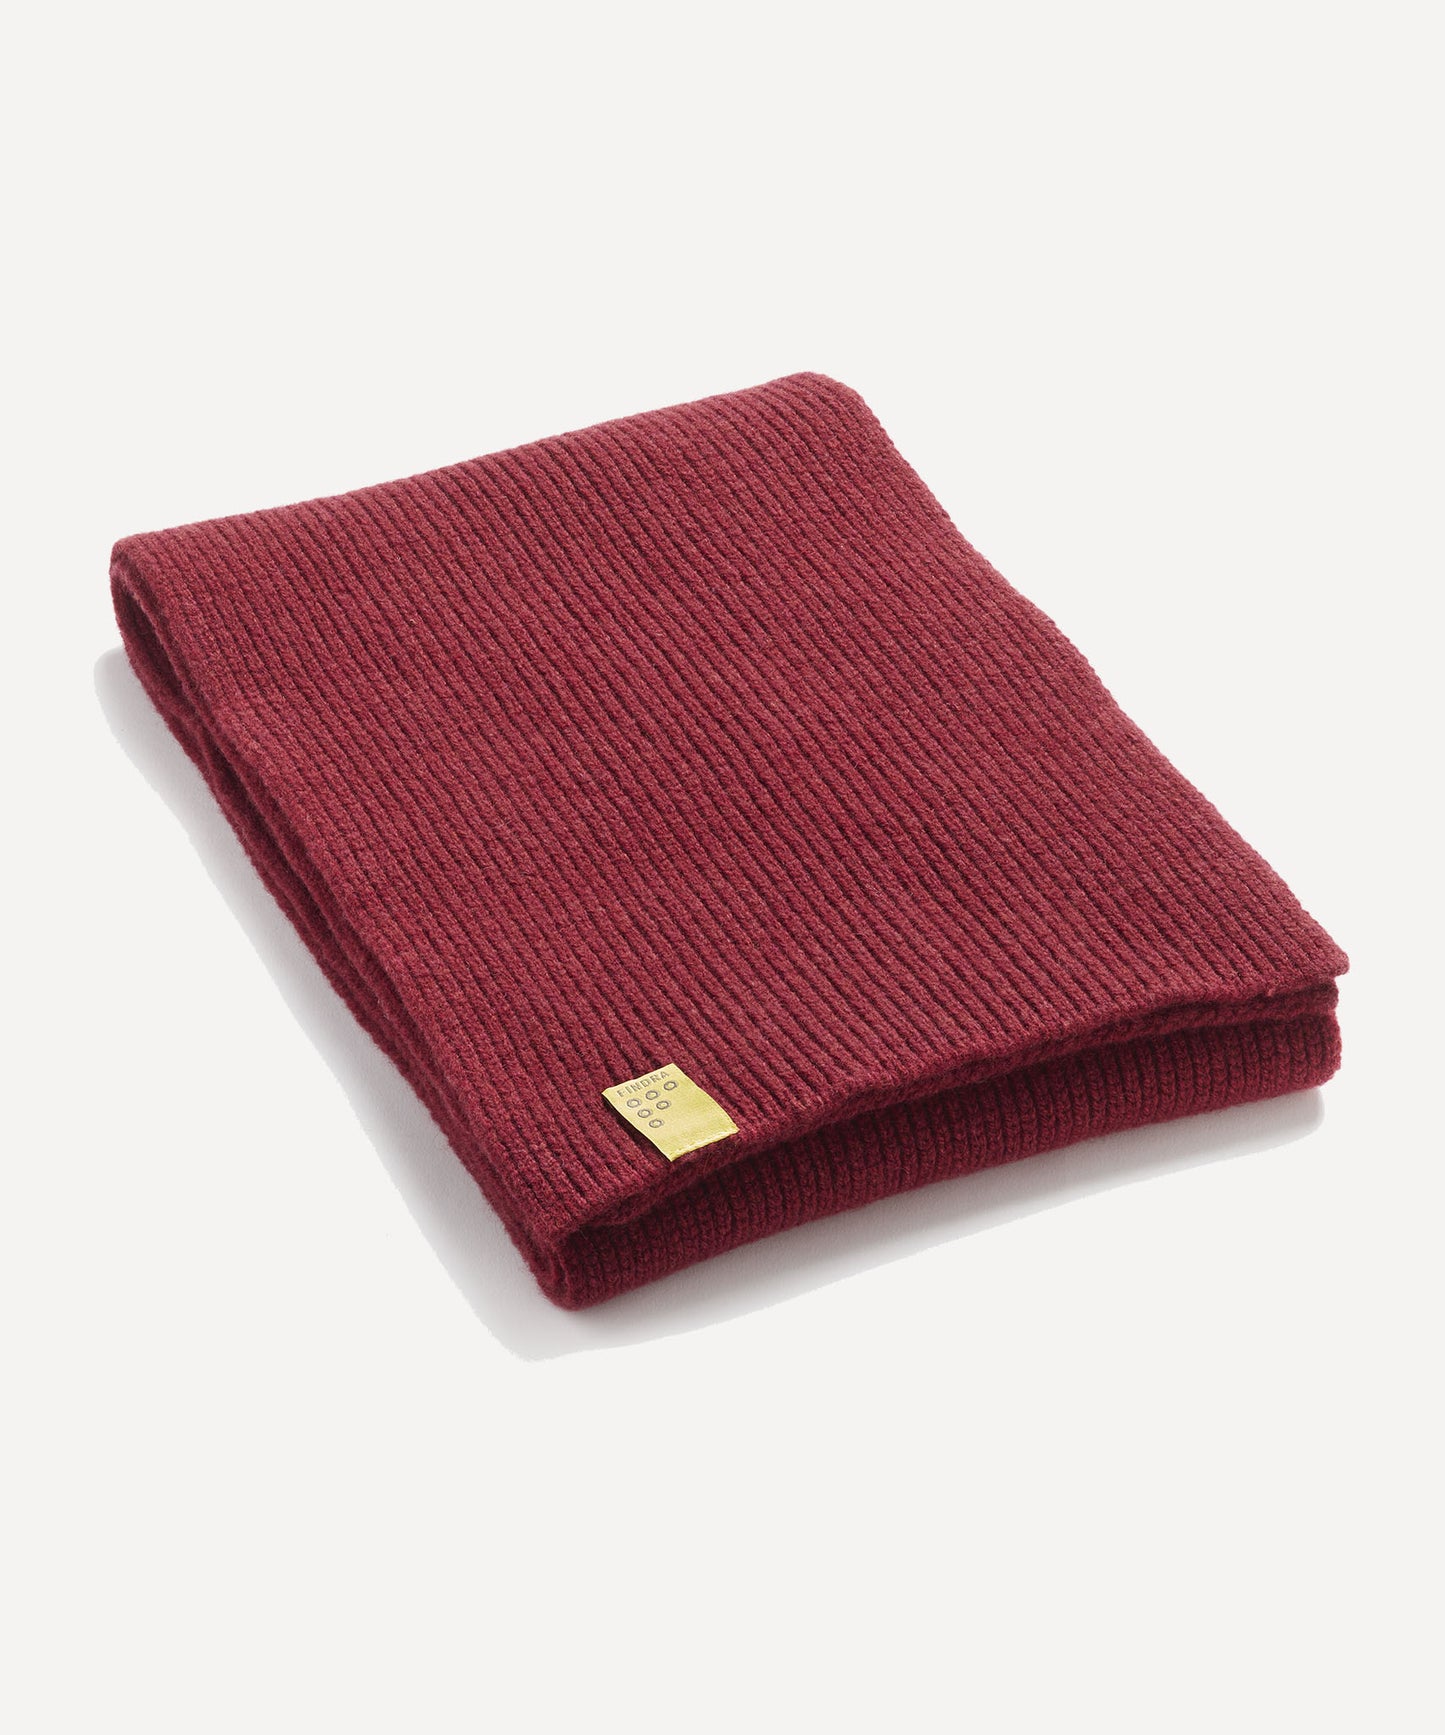 FINDRA Tweed Lambswool Scarf Brick Red Folded